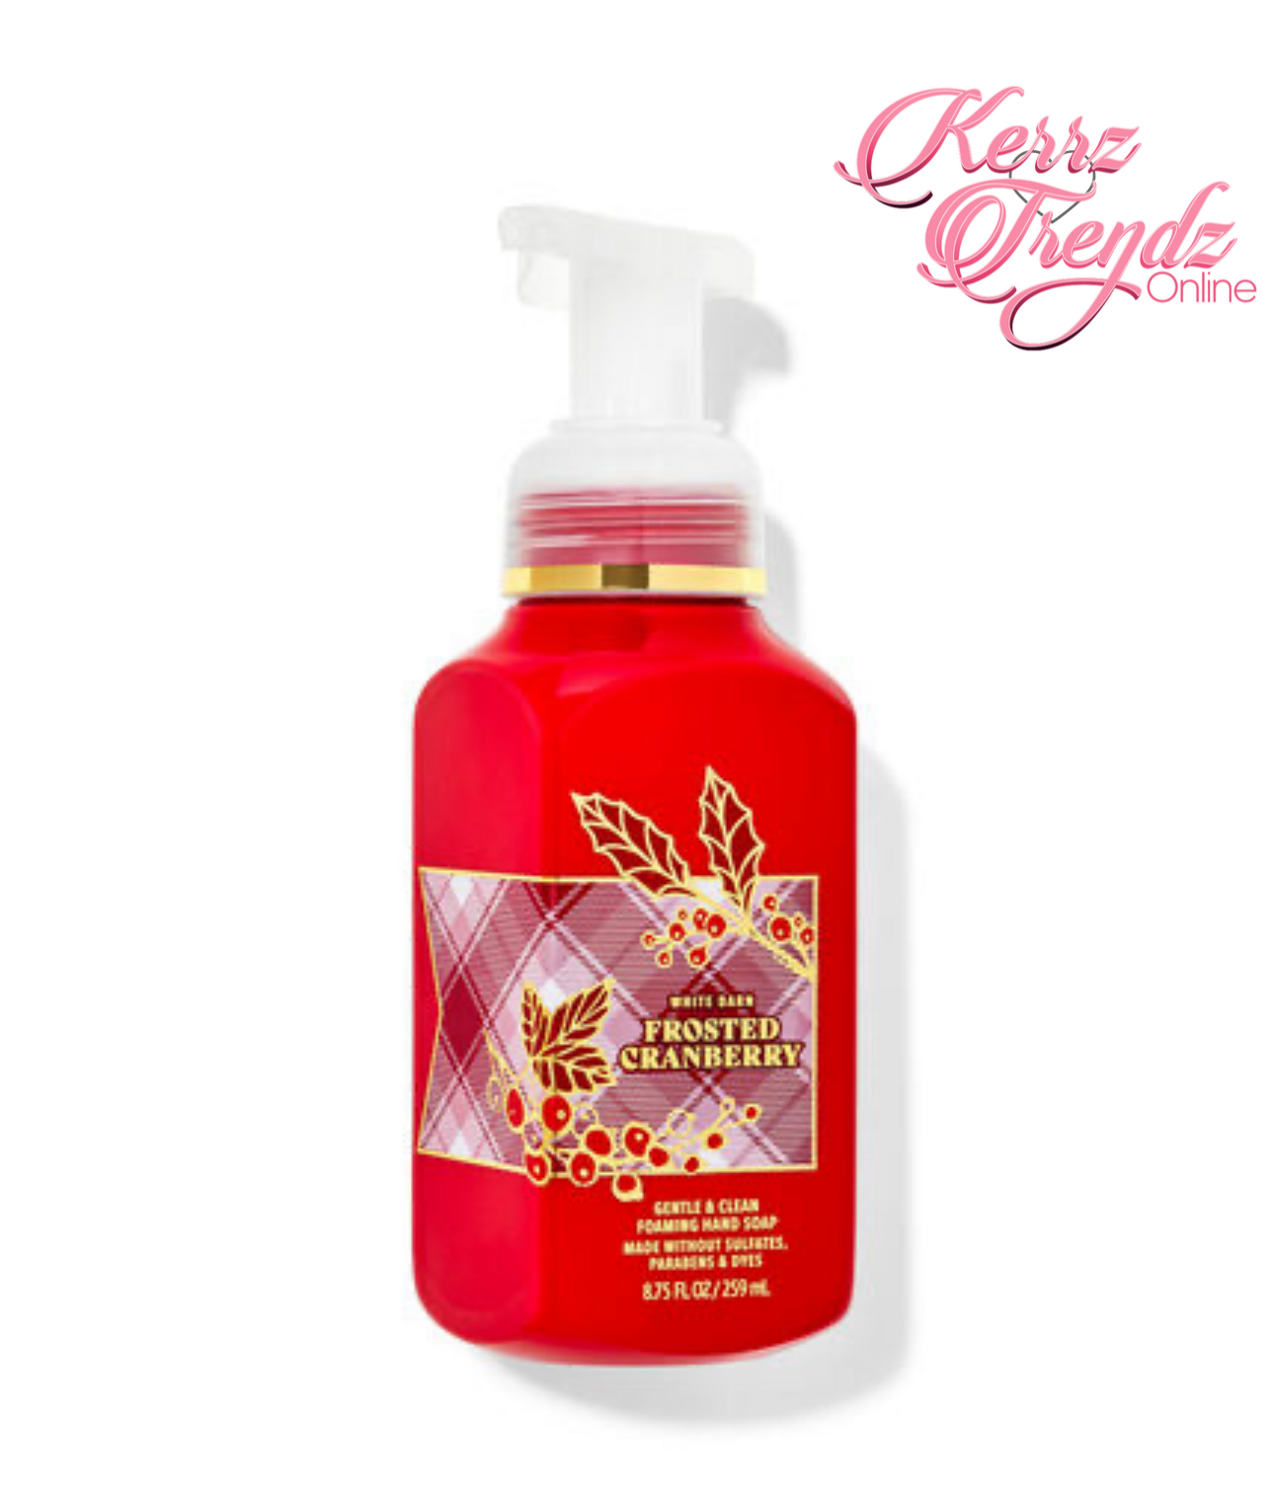 Frosted Cranberry Foaming Hand Soap